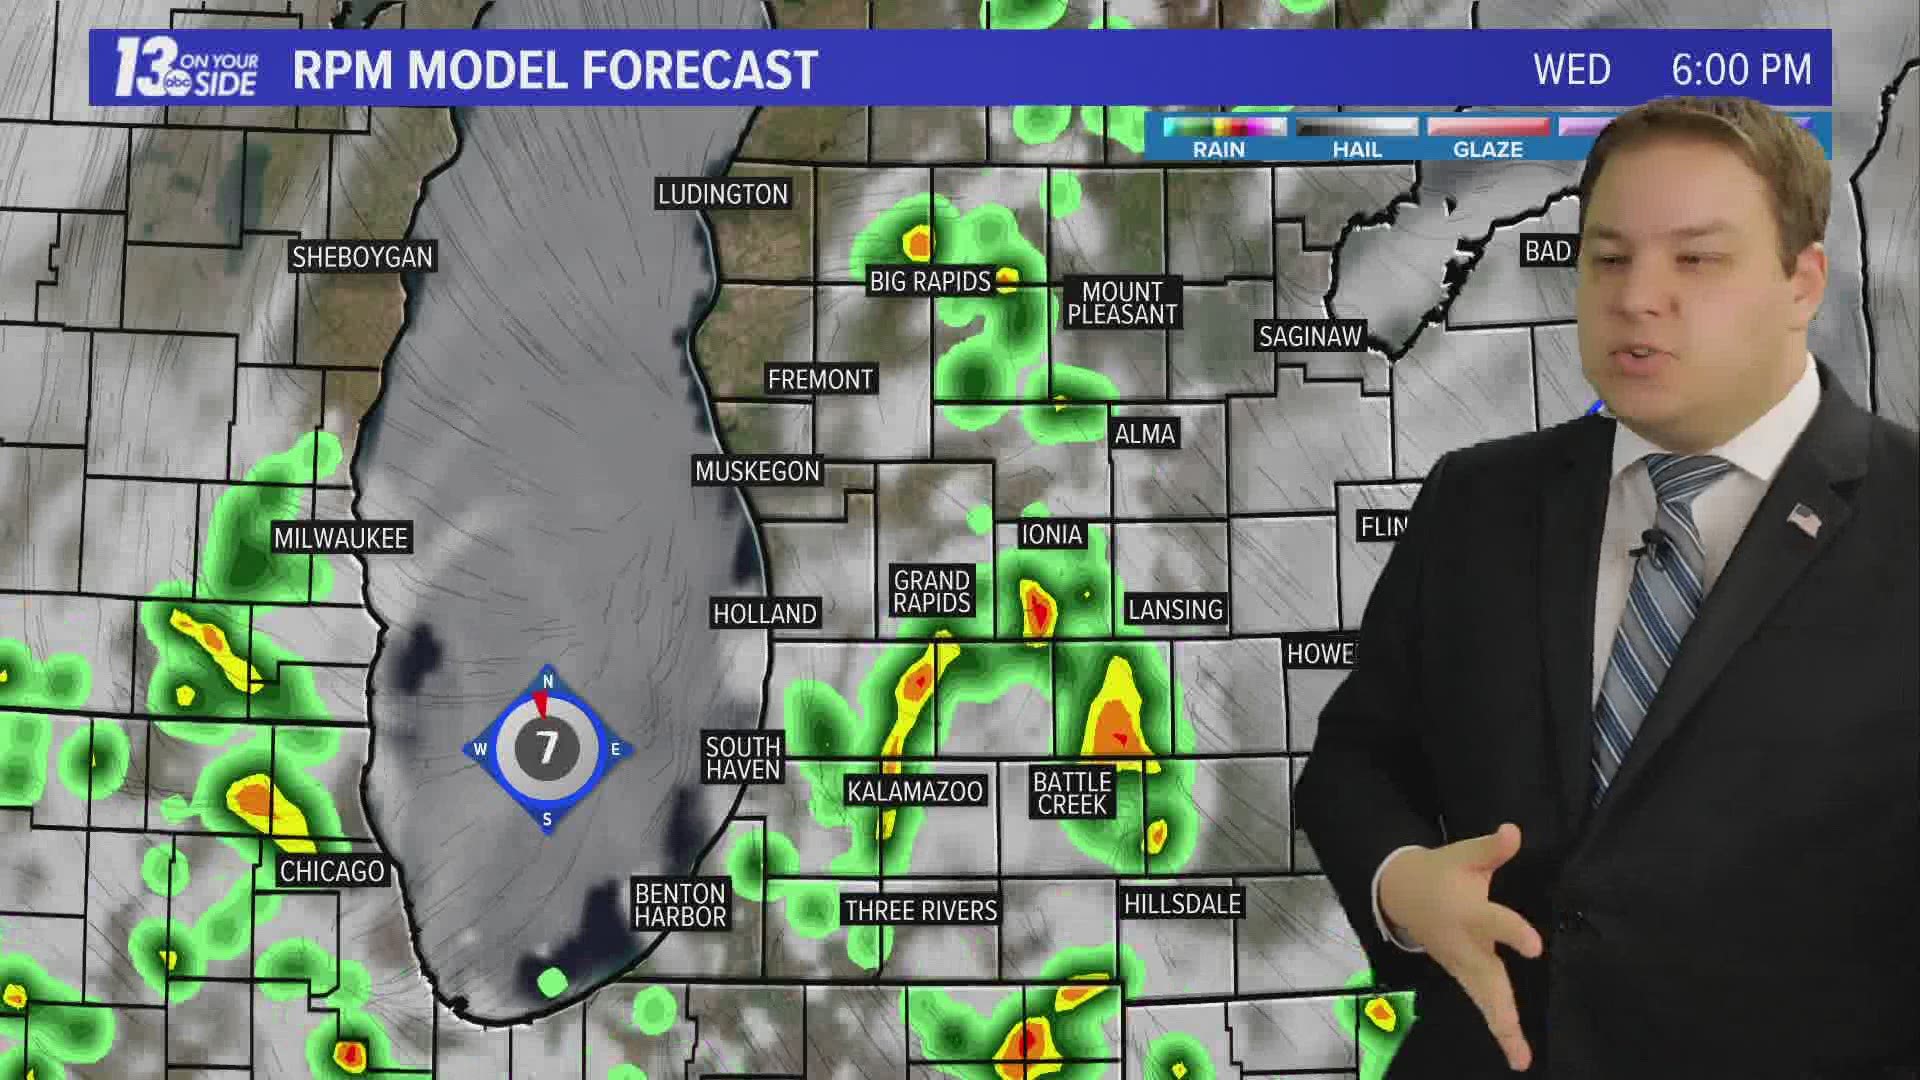 Storm chances are again around West Michigan Wednesday. Meteorologist Michael Behrens has the latest forecast.